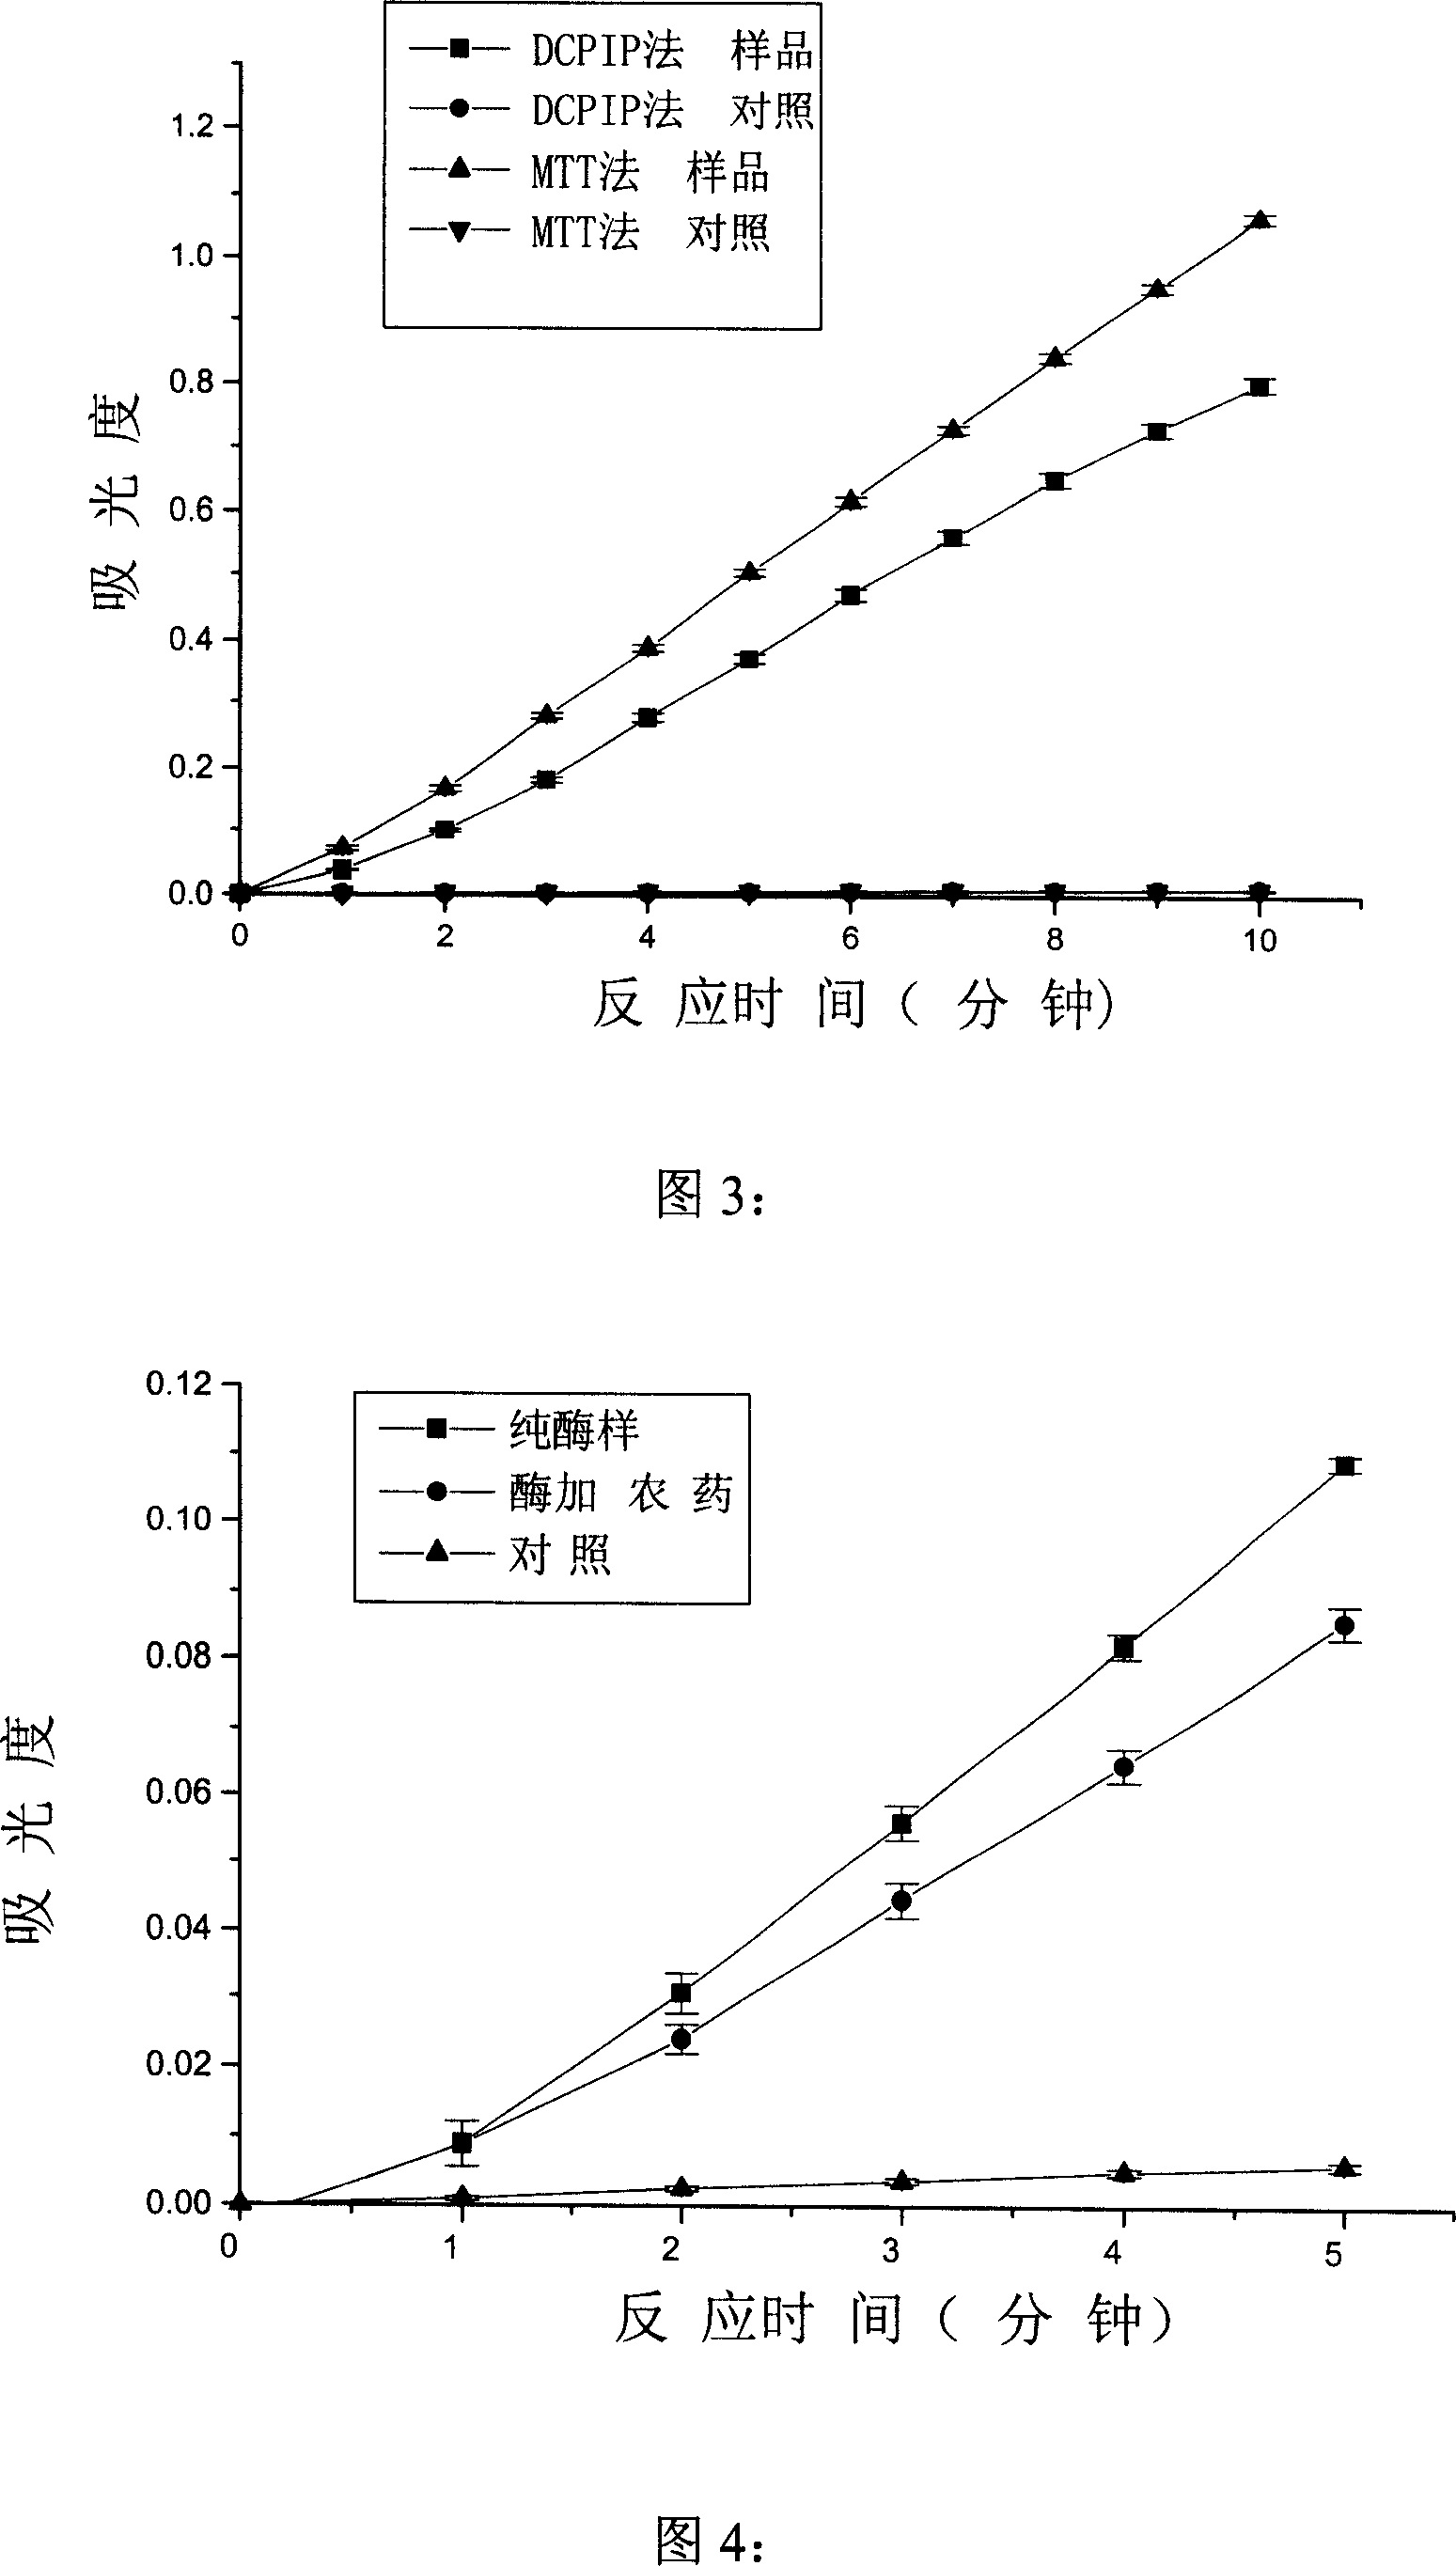 Spectrophotometry for testing activity of pyruvic acid dehydrogenase system